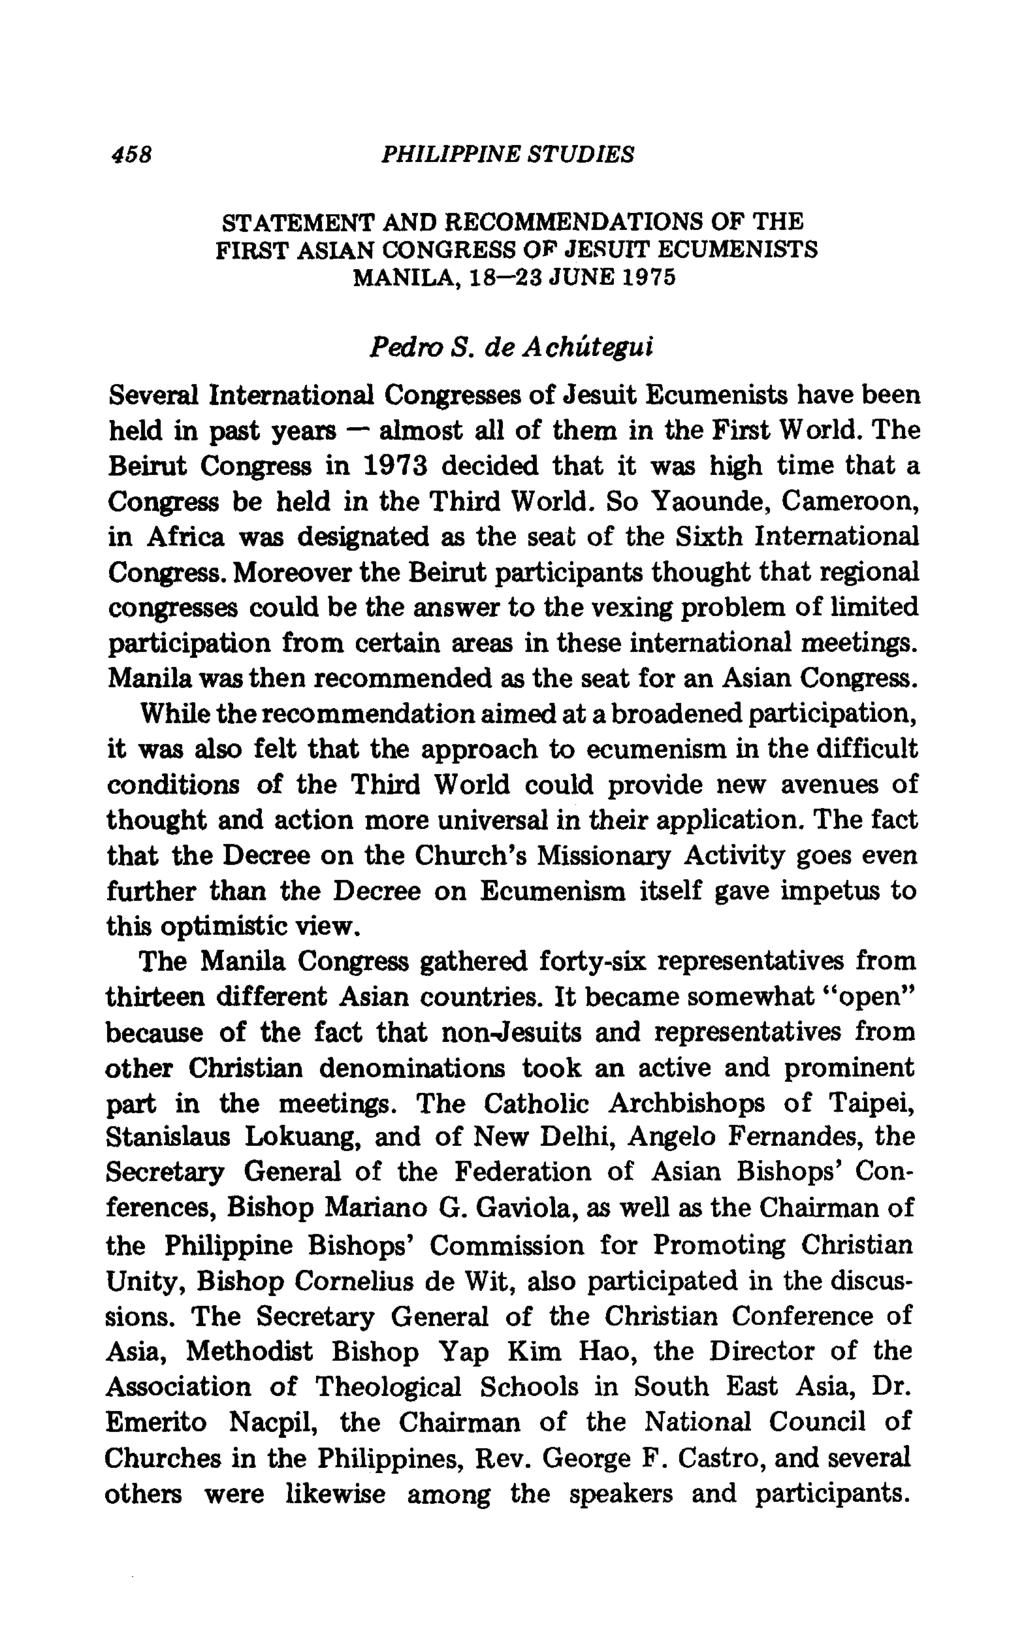 PHILIPPINE STUDIES STATEMENT AND RECOMMENDATIONS OF THE FIRST ASIAN CONGRESS OF JESUIT ECUMENISTS MANILA, 18-23 JUNE 1975 Pedro S.